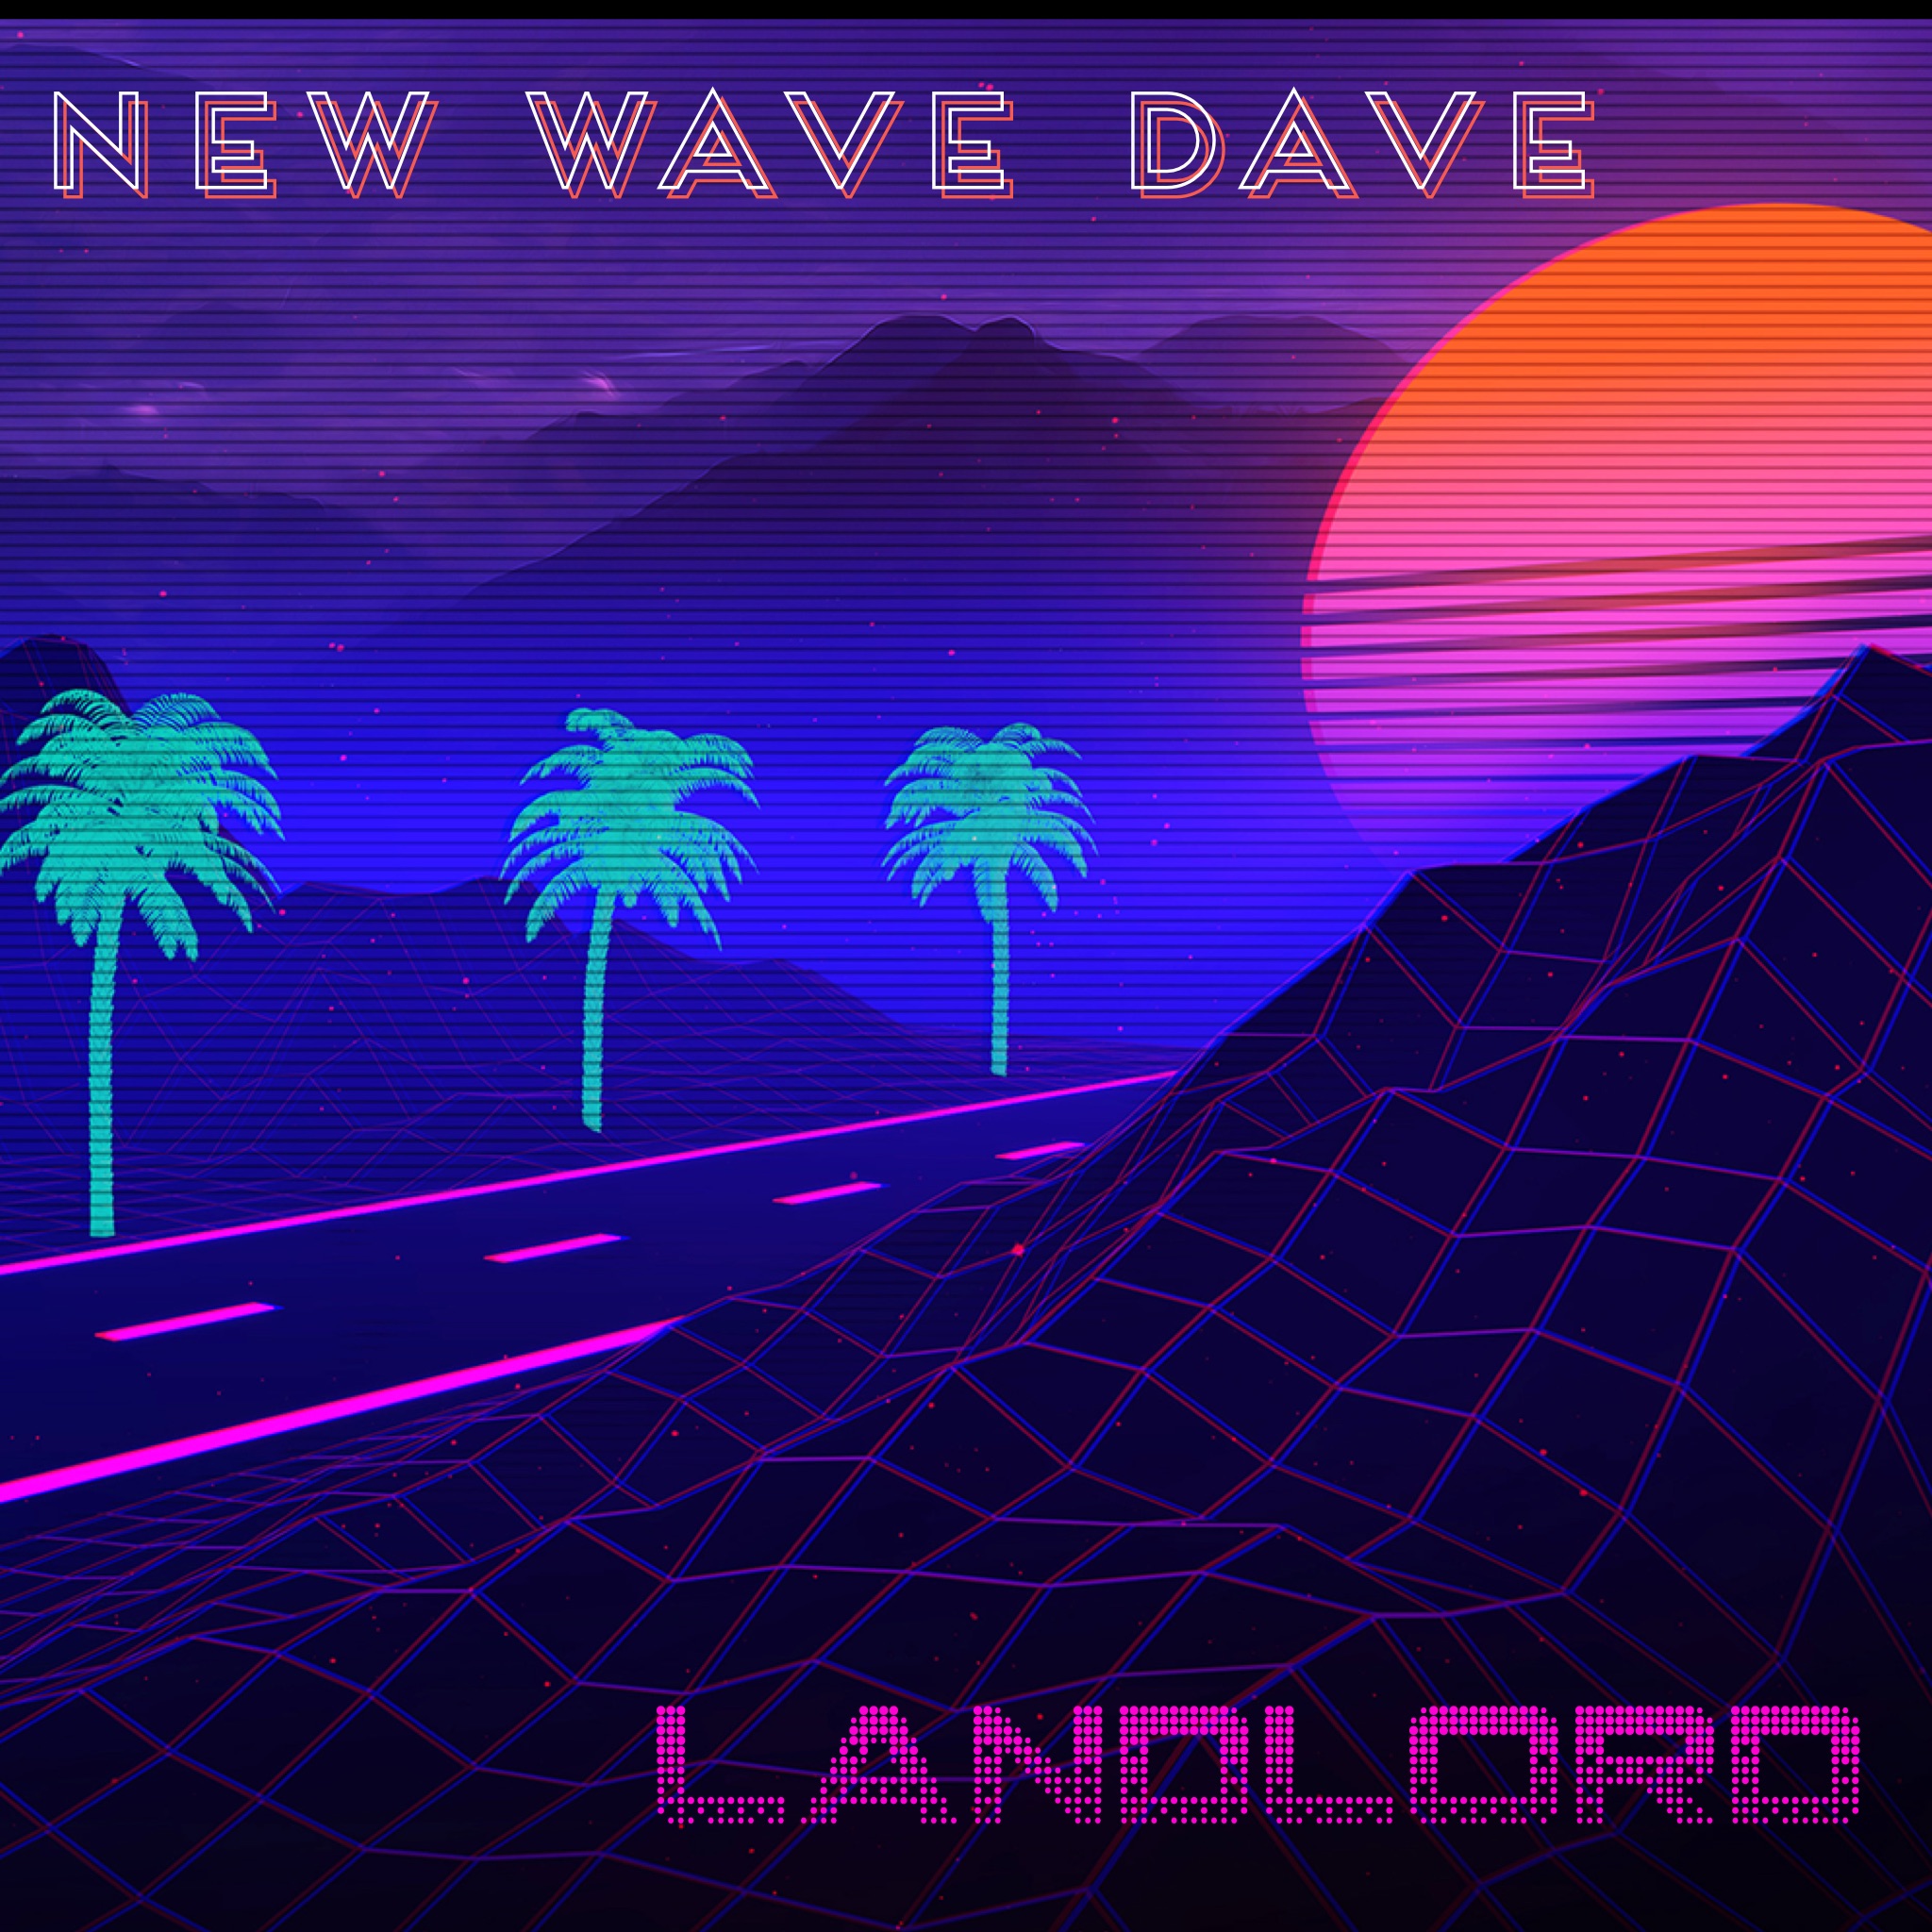 Art for Landlord by New Wave Dave